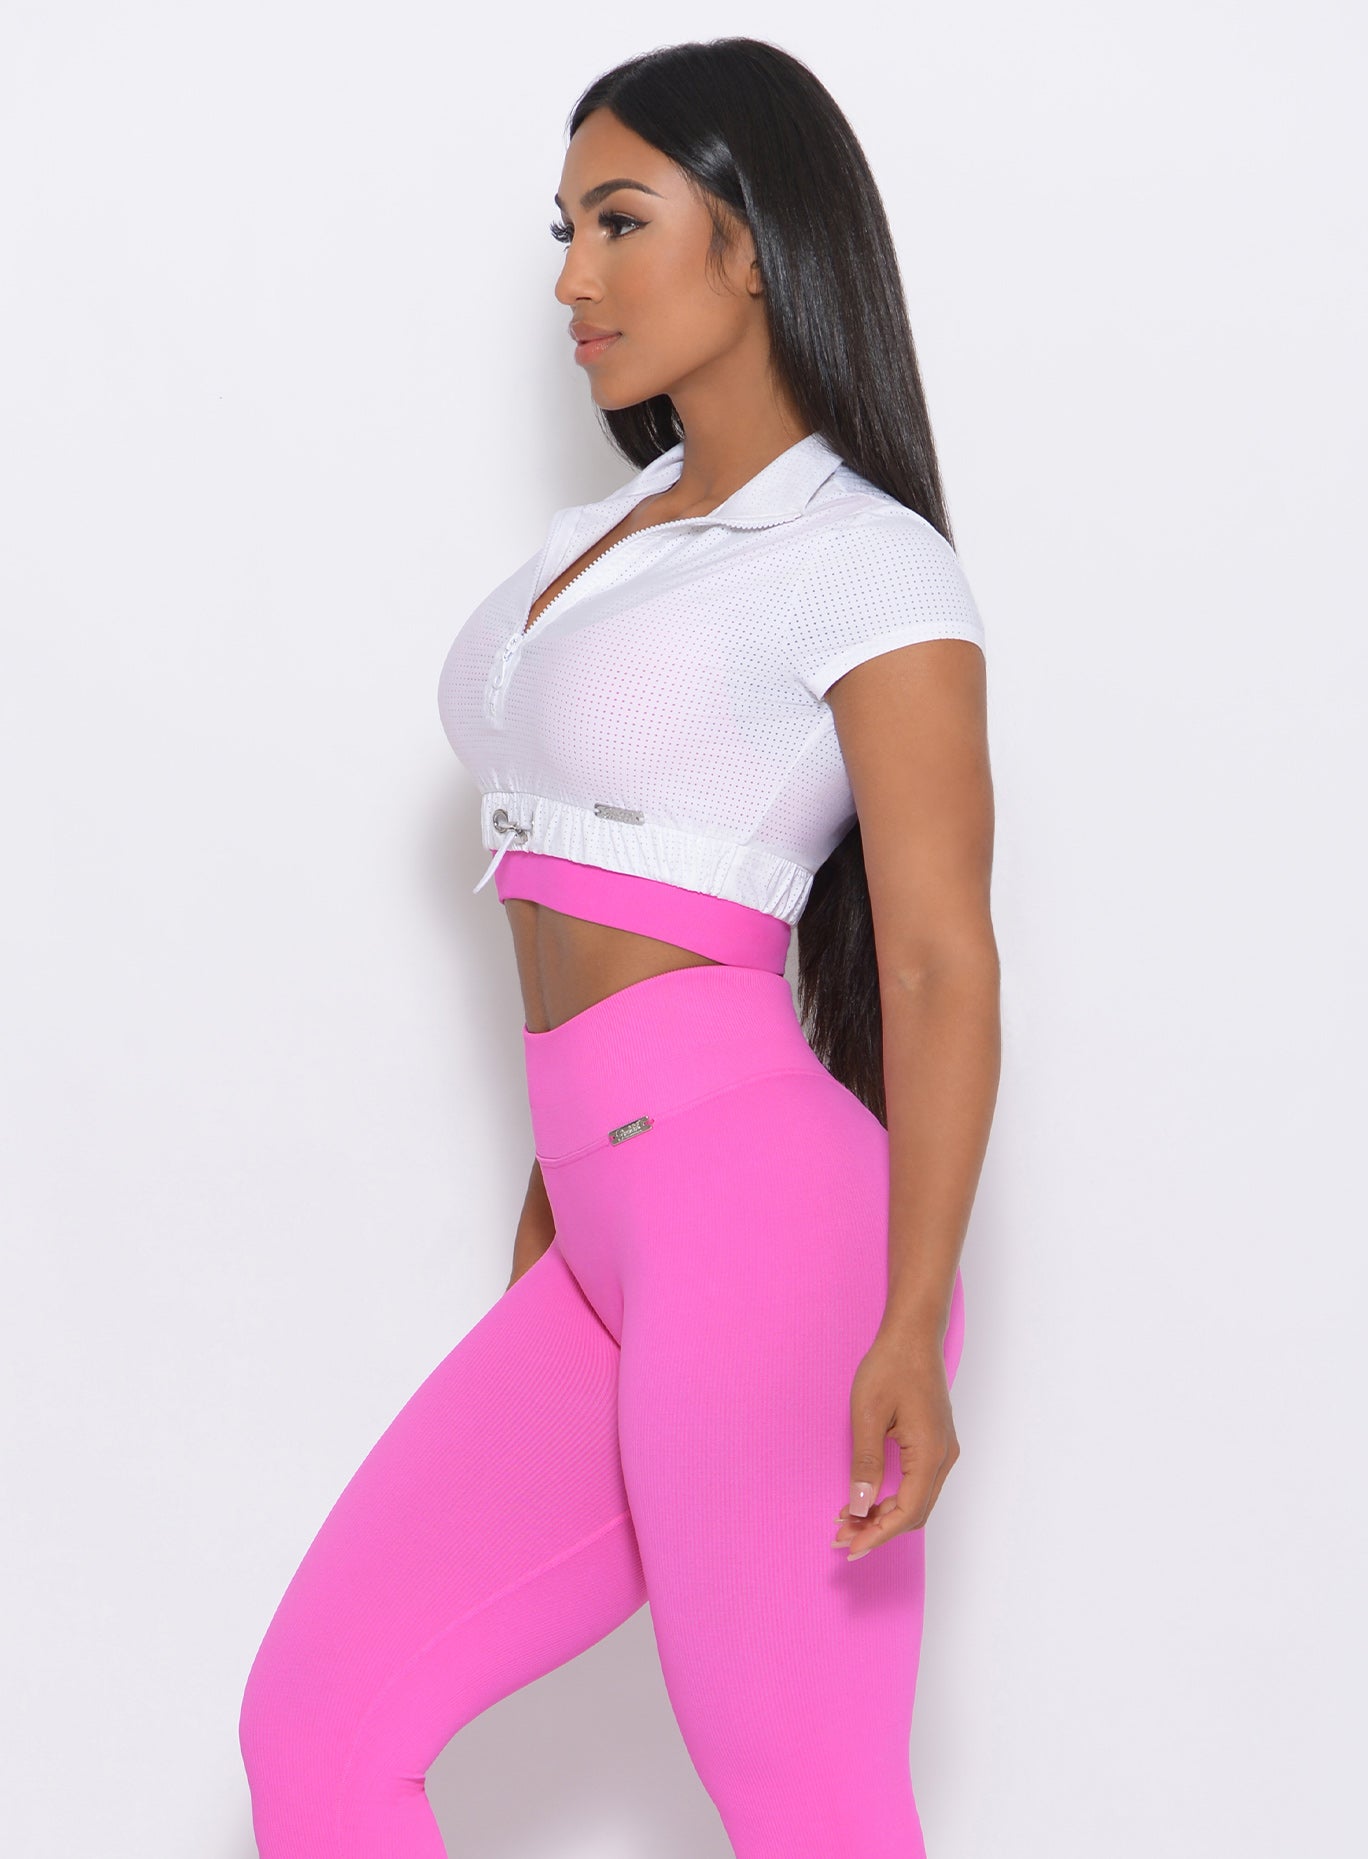 Left side view of the model in our white glow up top and a pink leggings